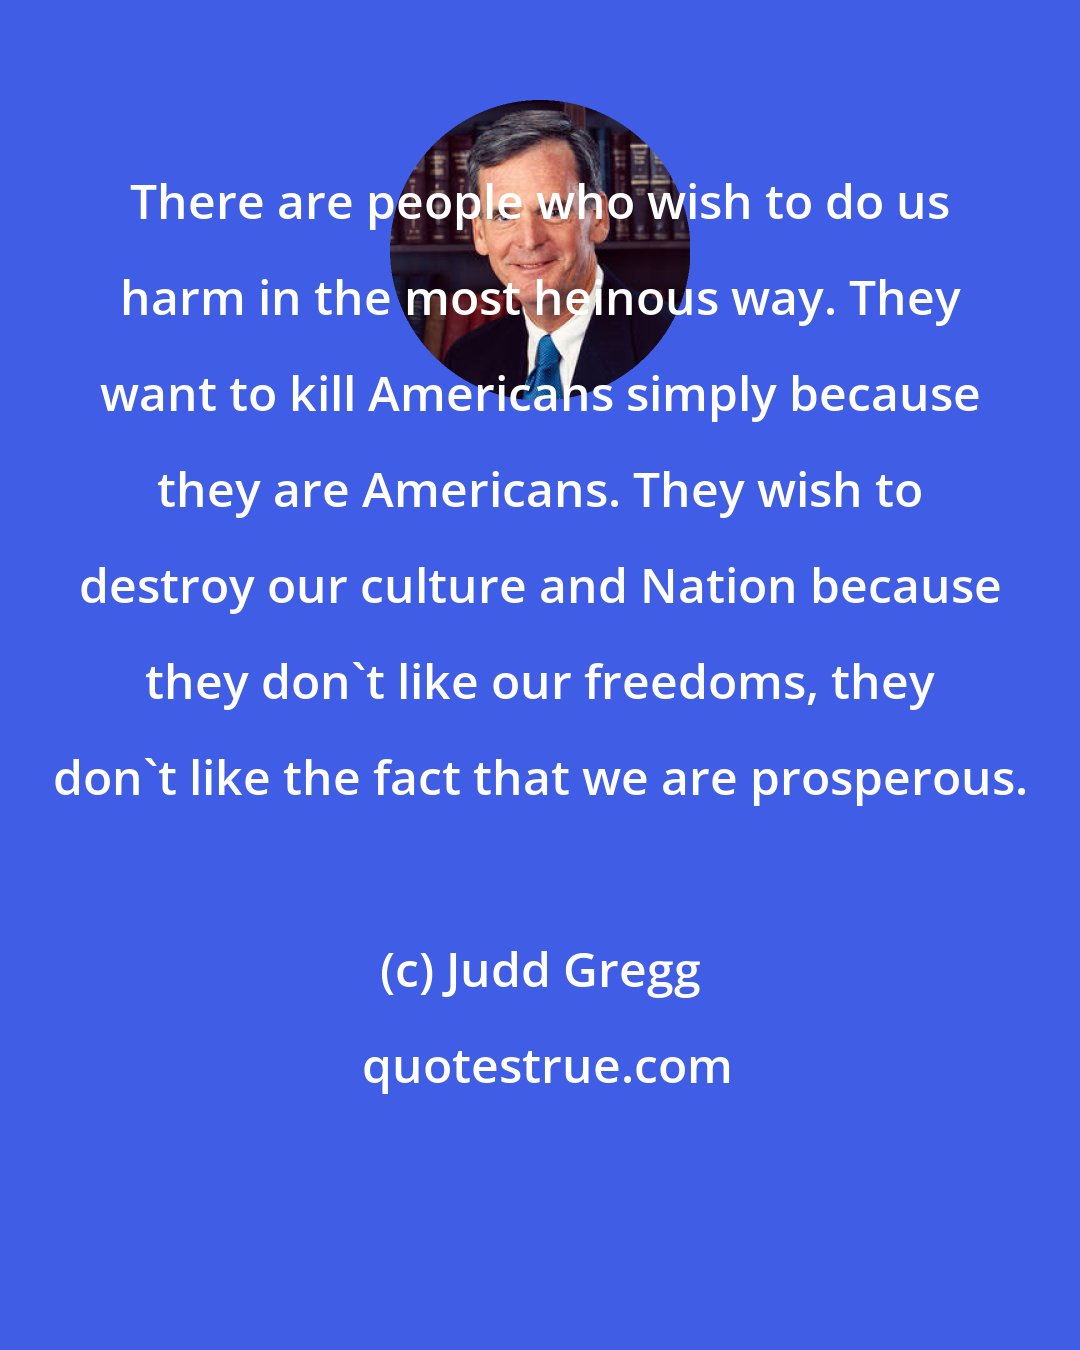 Judd Gregg: There are people who wish to do us harm in the most heinous way. They want to kill Americans simply because they are Americans. They wish to destroy our culture and Nation because they don't like our freedoms, they don't like the fact that we are prosperous.